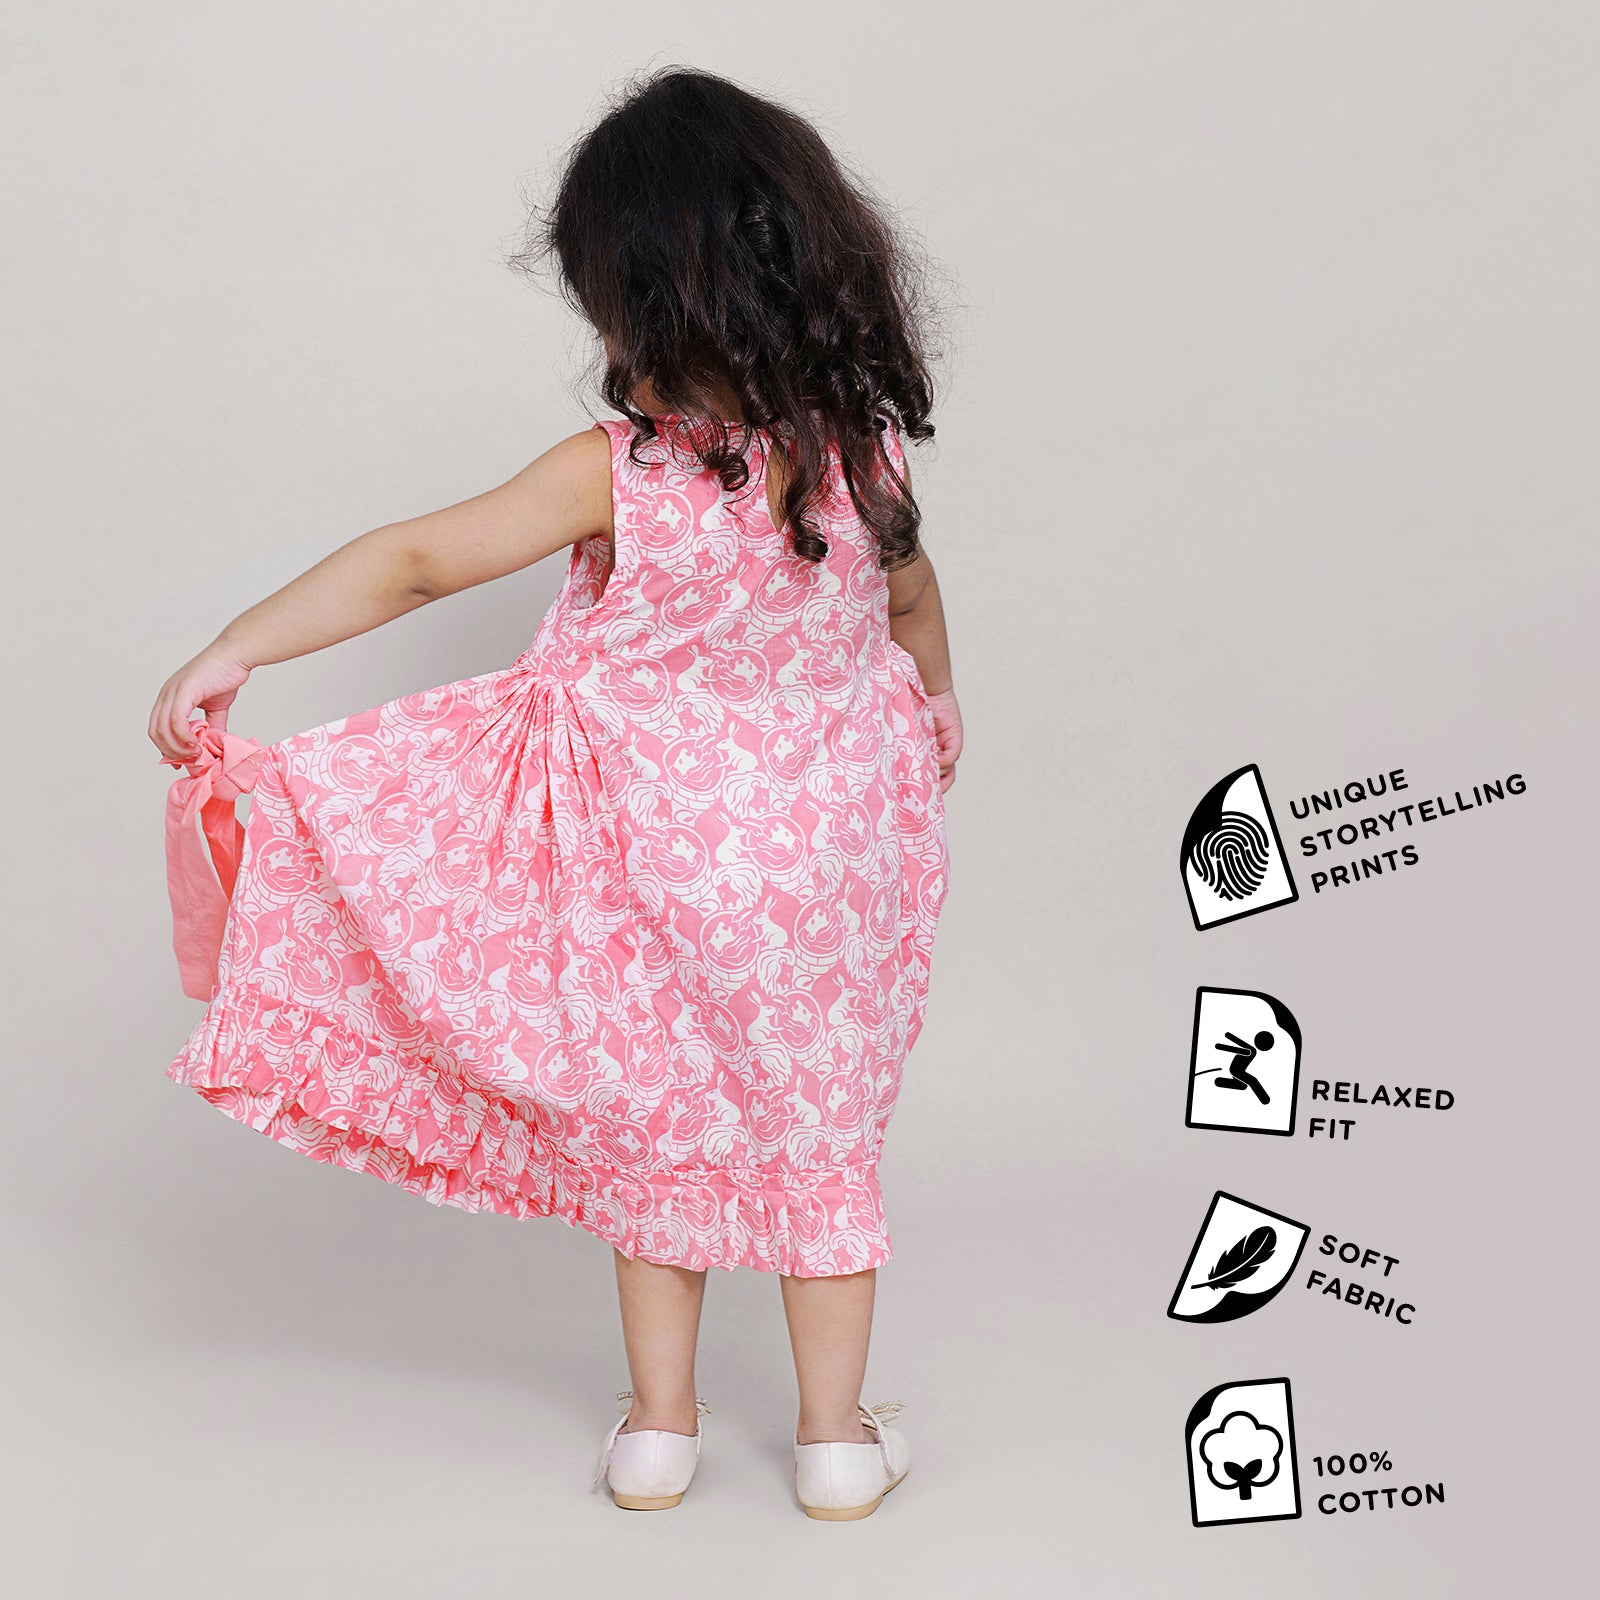 Cotton Side Bow & Gathered dress For Girls with The Foolish Lion & The Clever Rabbit Print